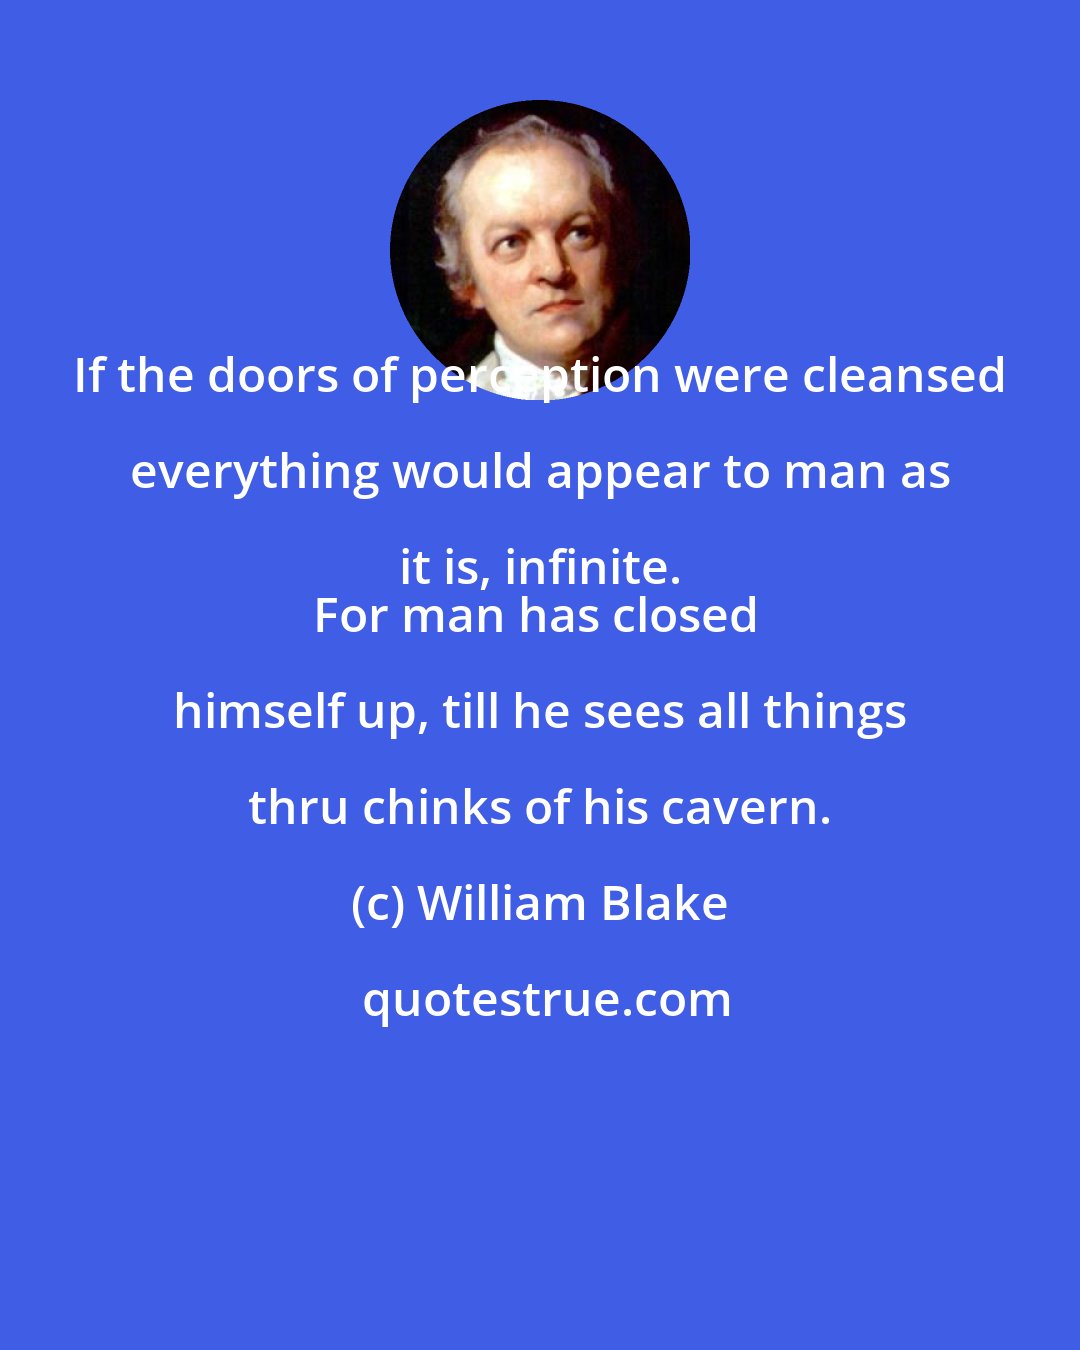 William Blake: If the doors of perception were cleansed everything would appear to man as it is, infinite. 
For man has closed himself up, till he sees all things thru chinks of his cavern.